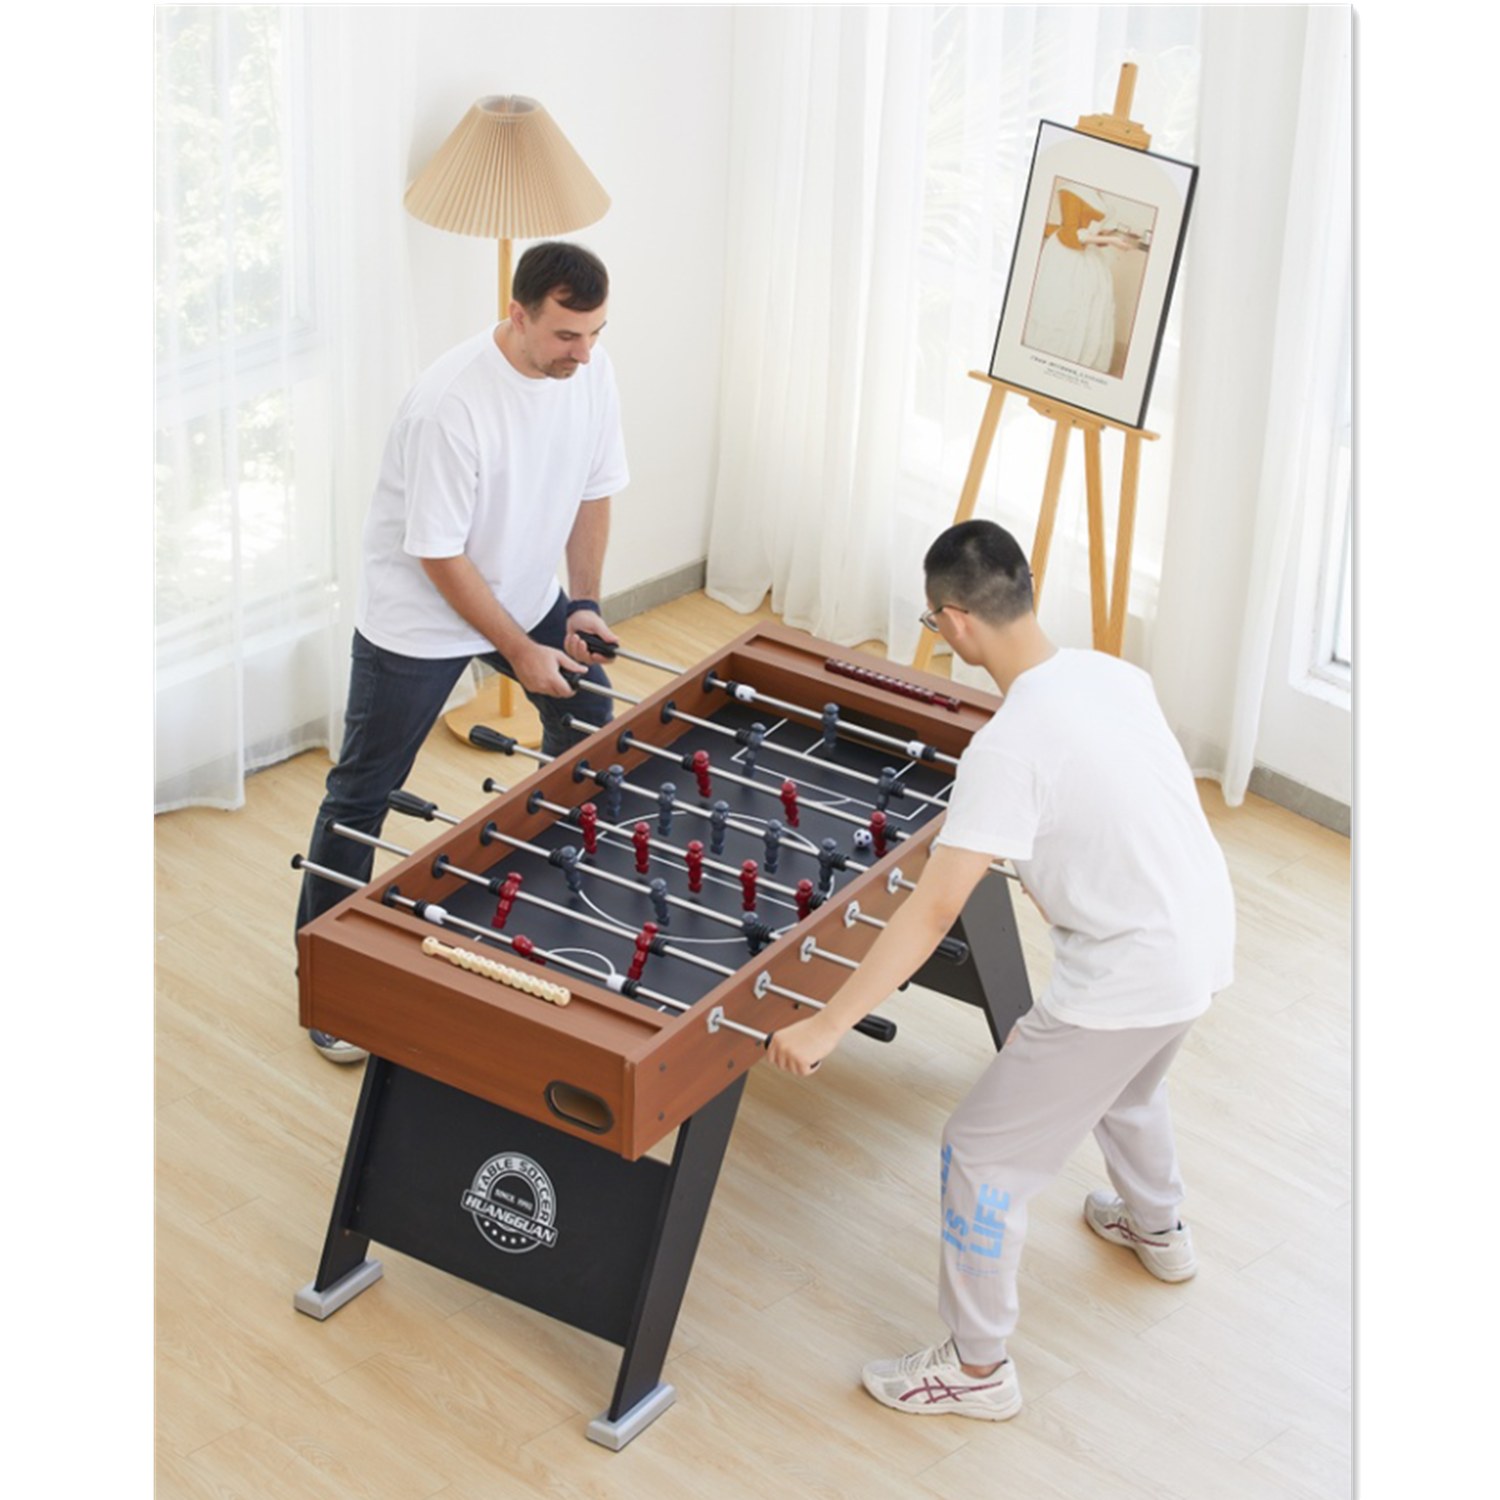 5FT Foosball Soccer Table| Solid Steel Rods